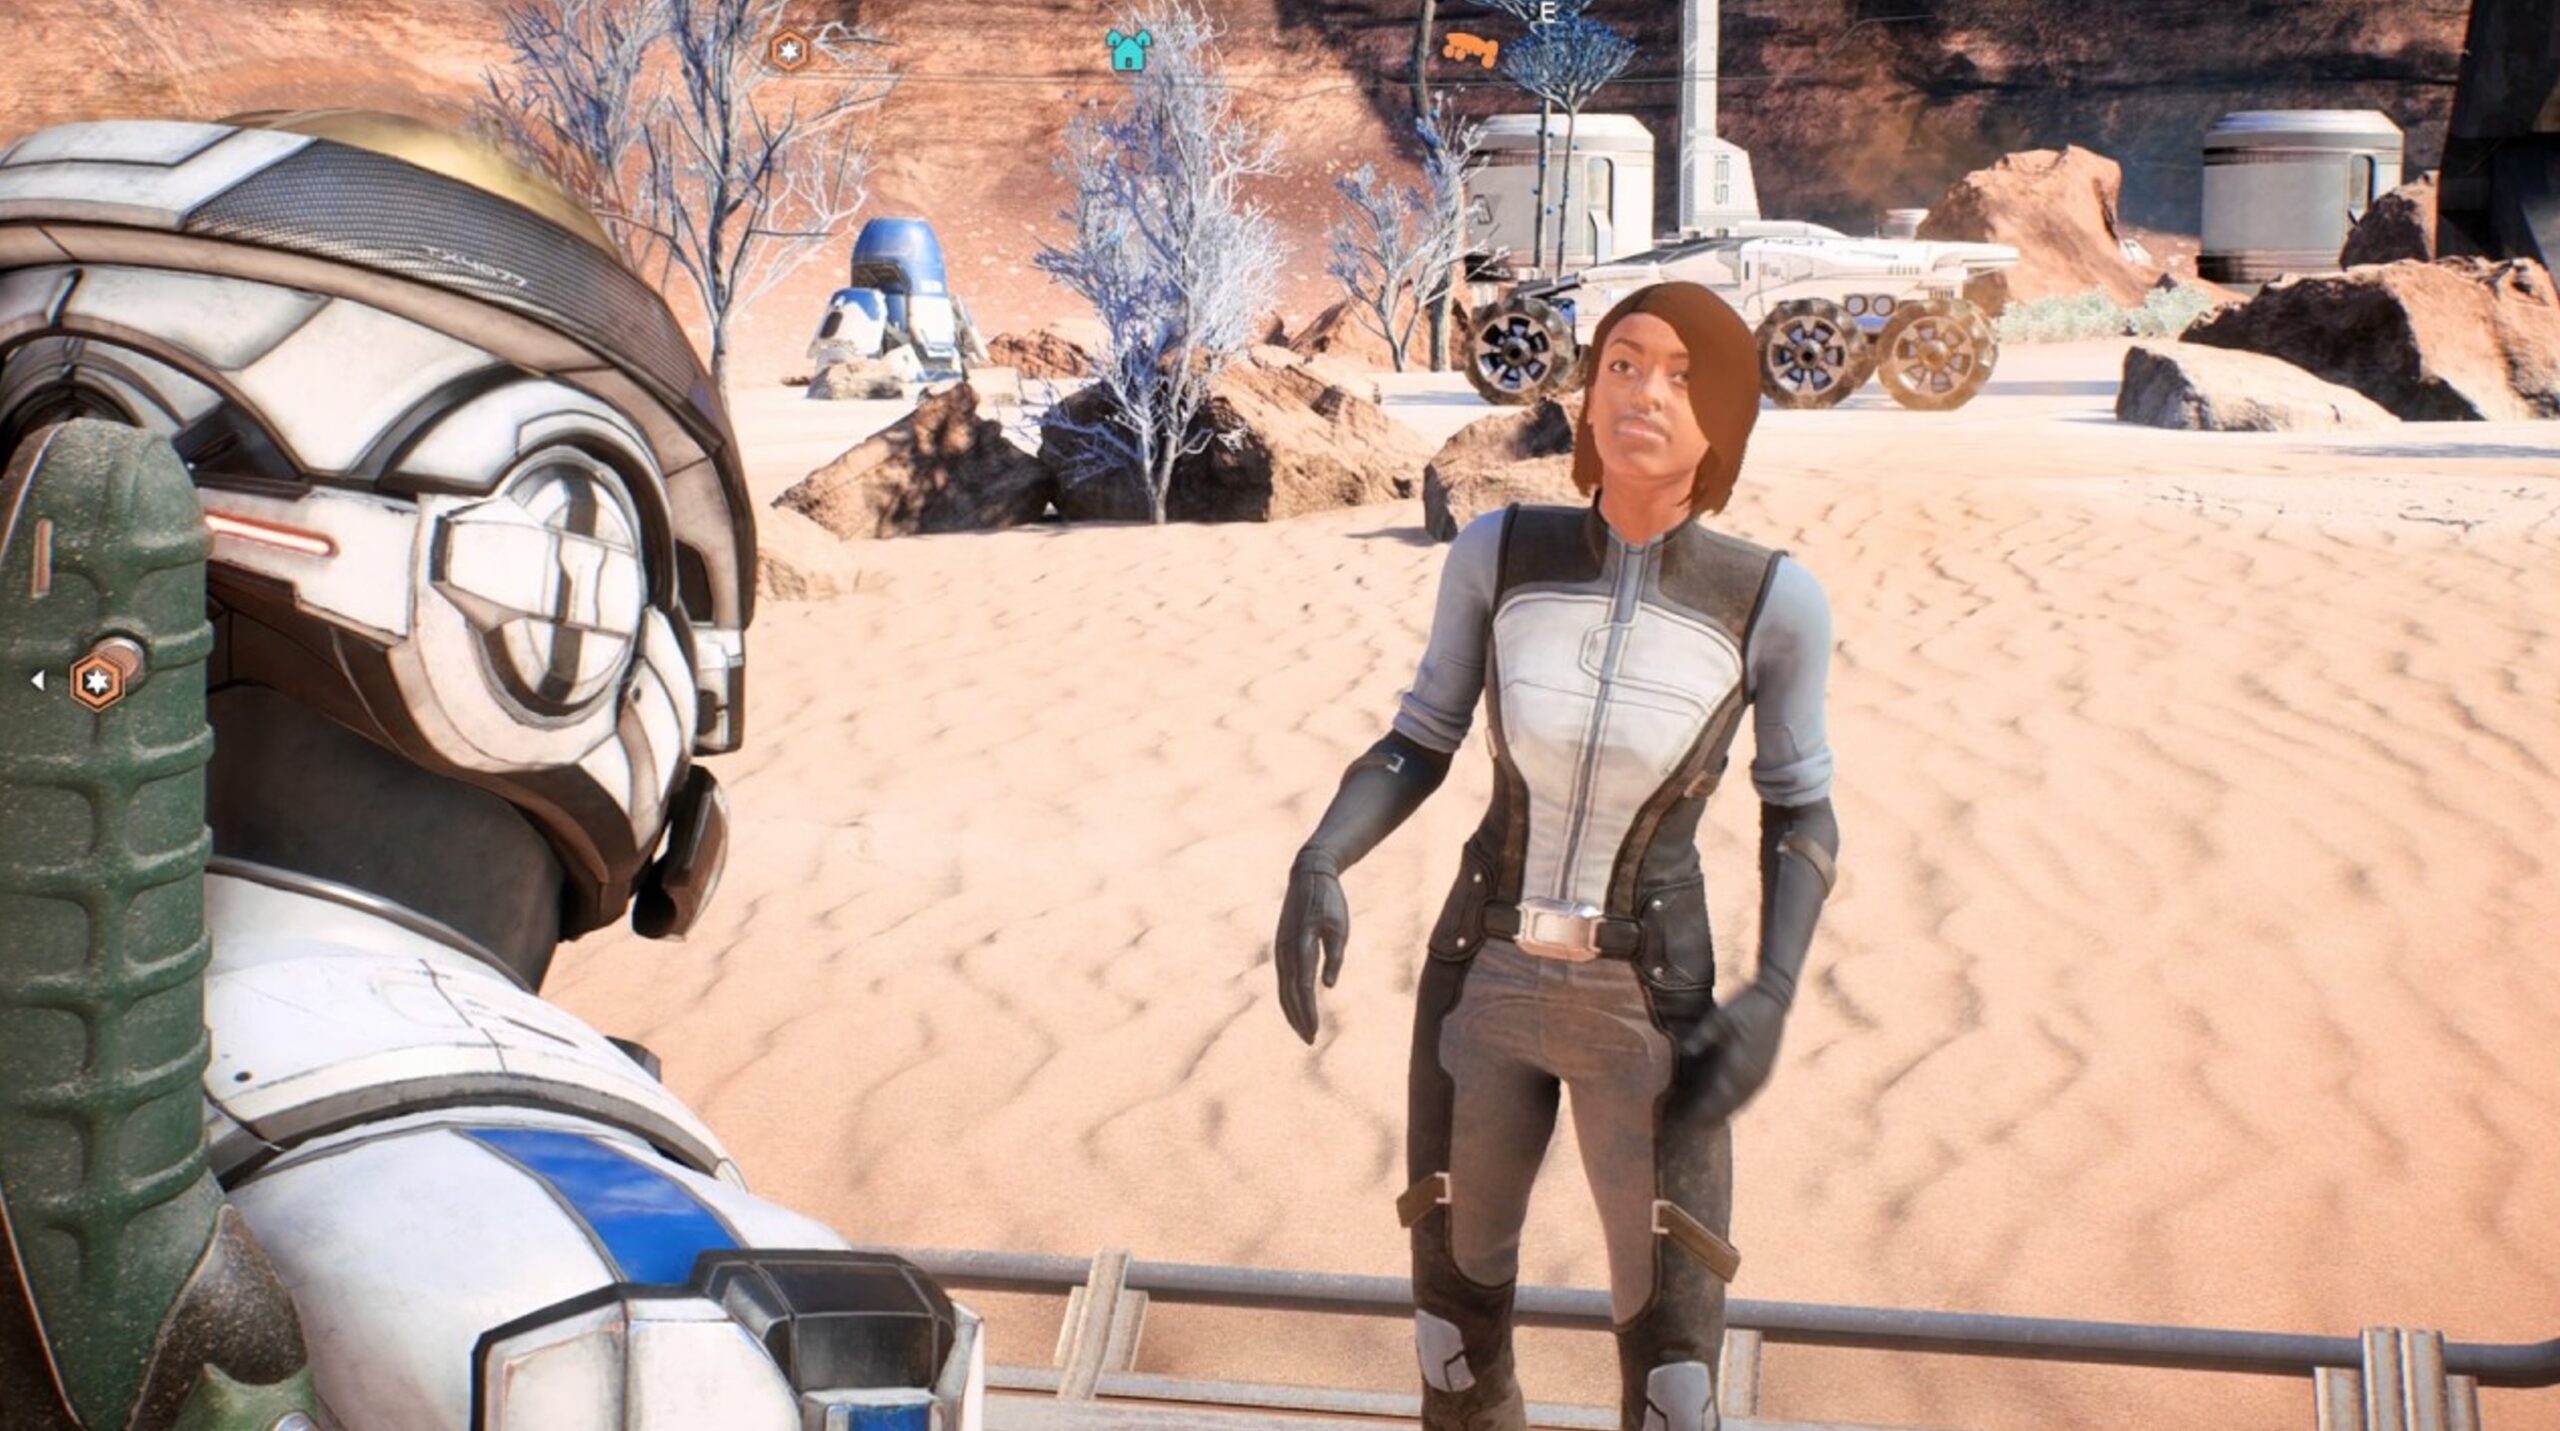 Western RPGs love verbose NPCs. In “Mass Effect”, you can spend hours chatting with crew members about their favorite color or the intricacies of space hamsters. Because nothing says “epic quest” like discussing hamster habitats. :: BioWare